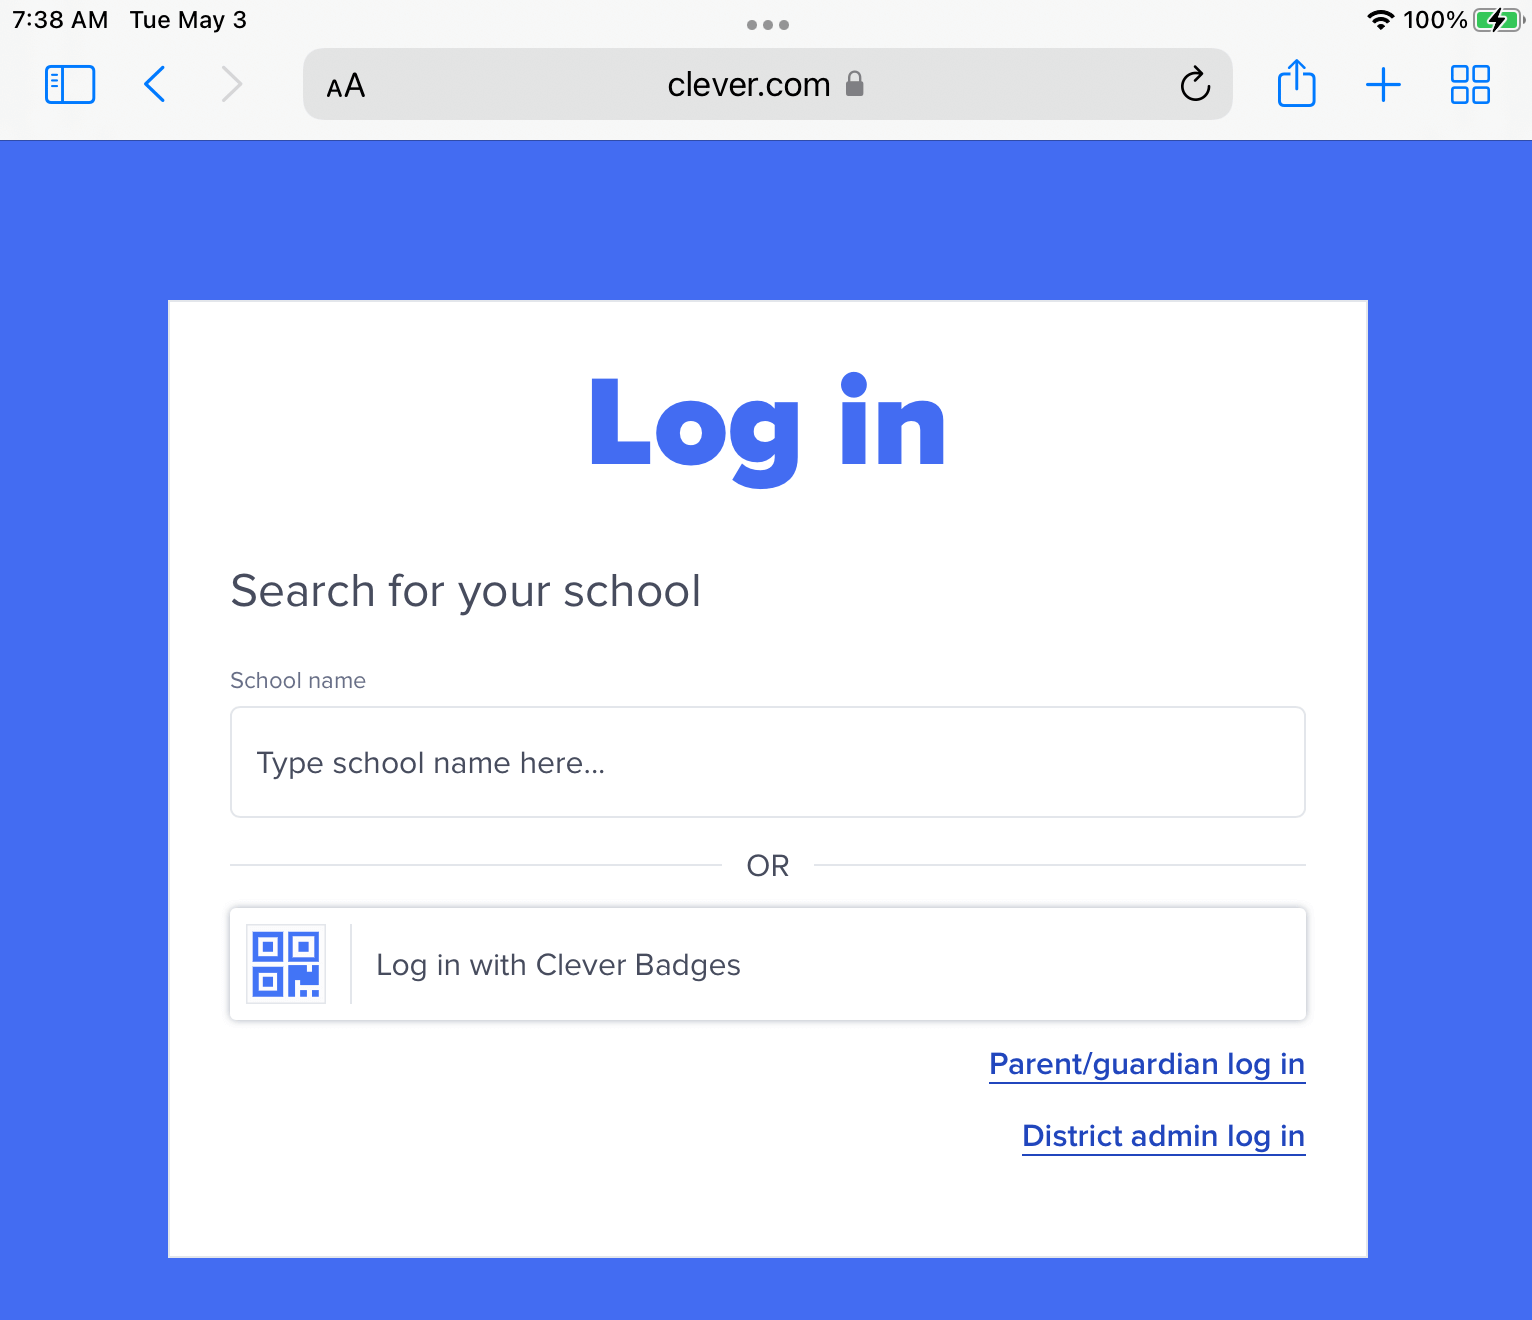 Screenshot of the Clever page that asks users to search for their school